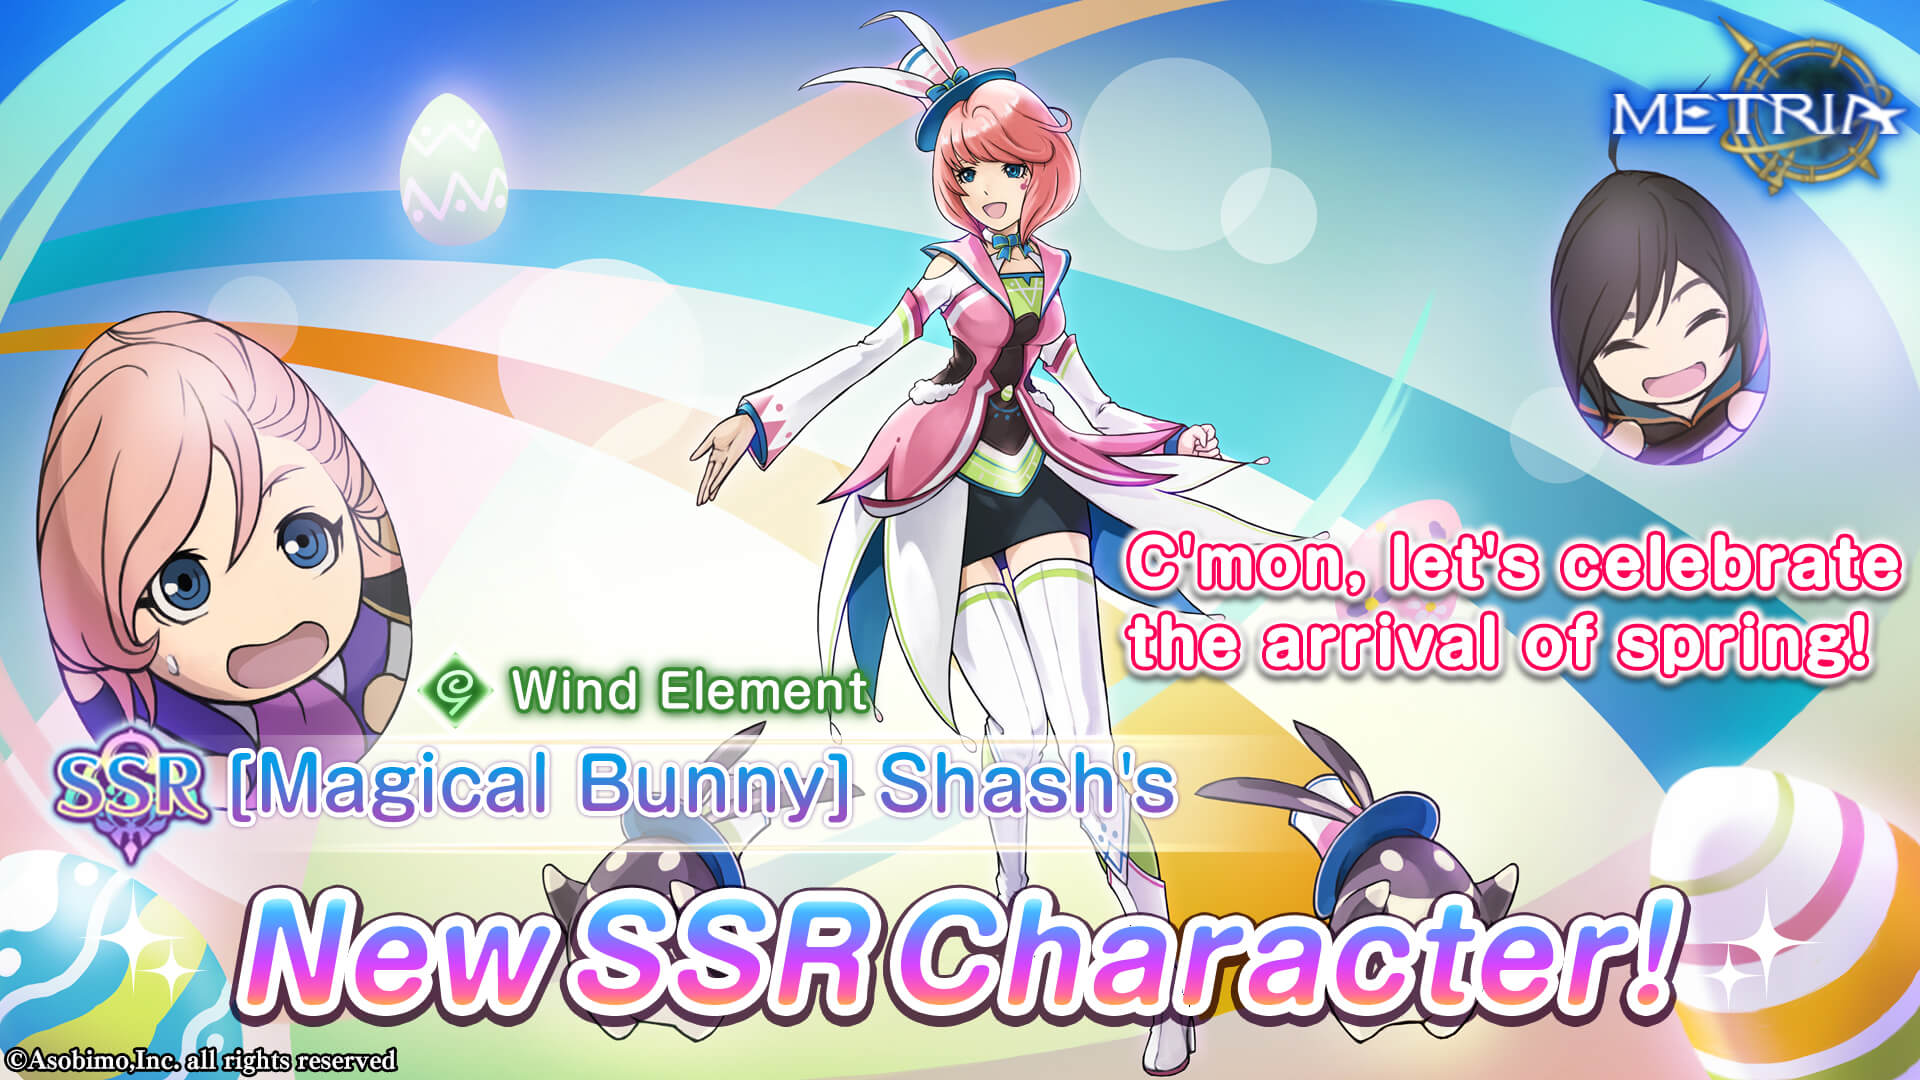 Wind Element! New SSR Character: "Magical Bunny Shash's" Available for Purchase!